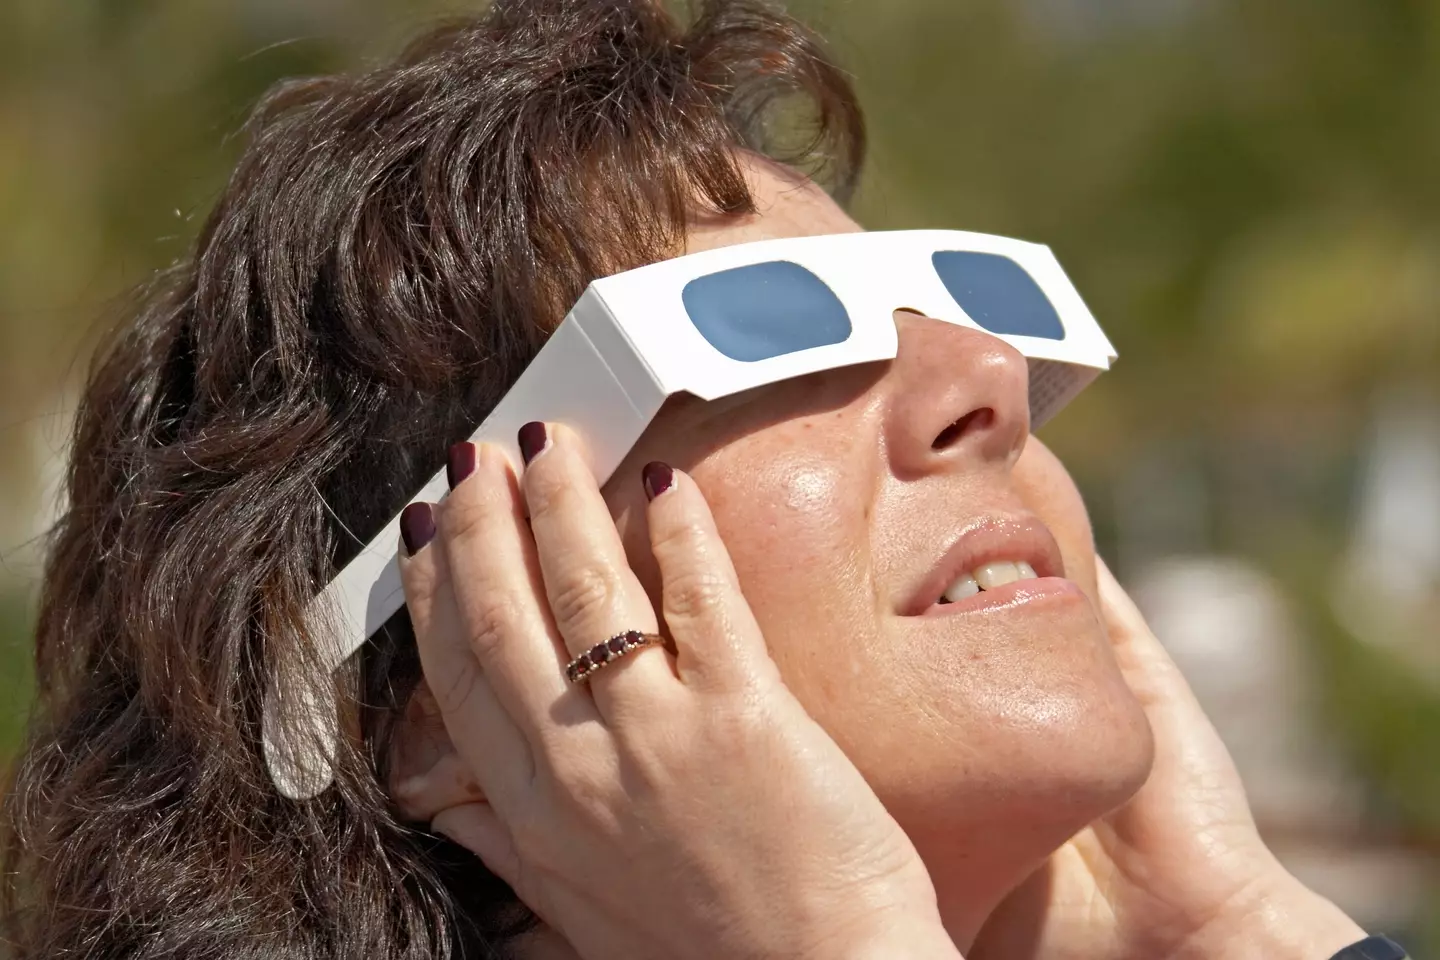 Solar eclipse glasses are essential to view the event.